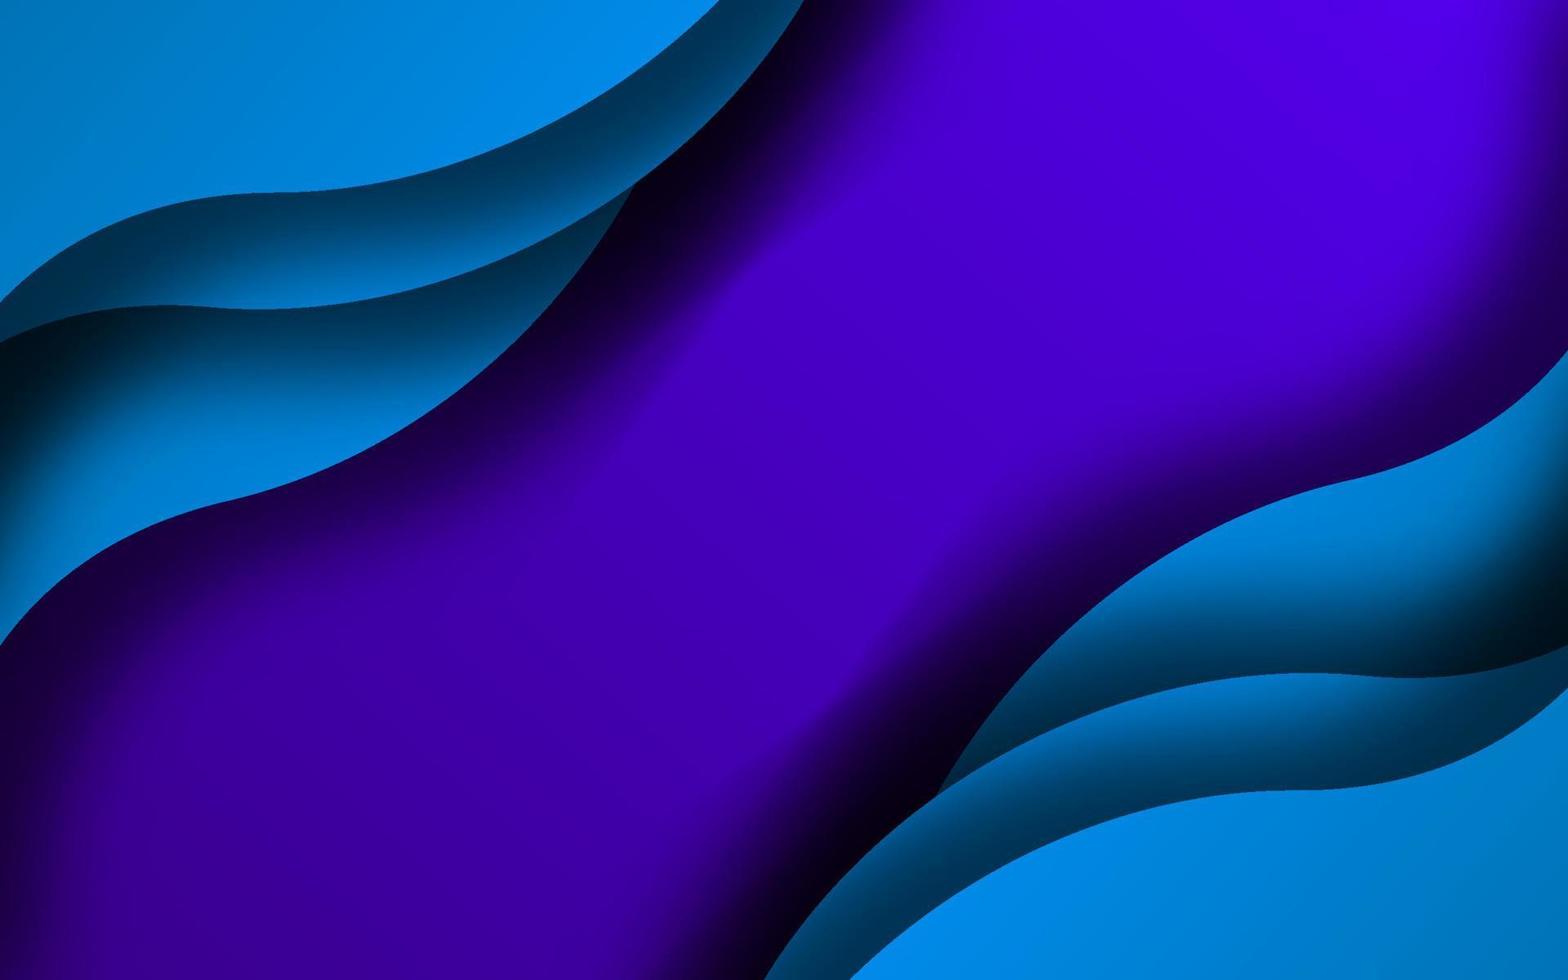 Abstract navy blue wave shape background vector